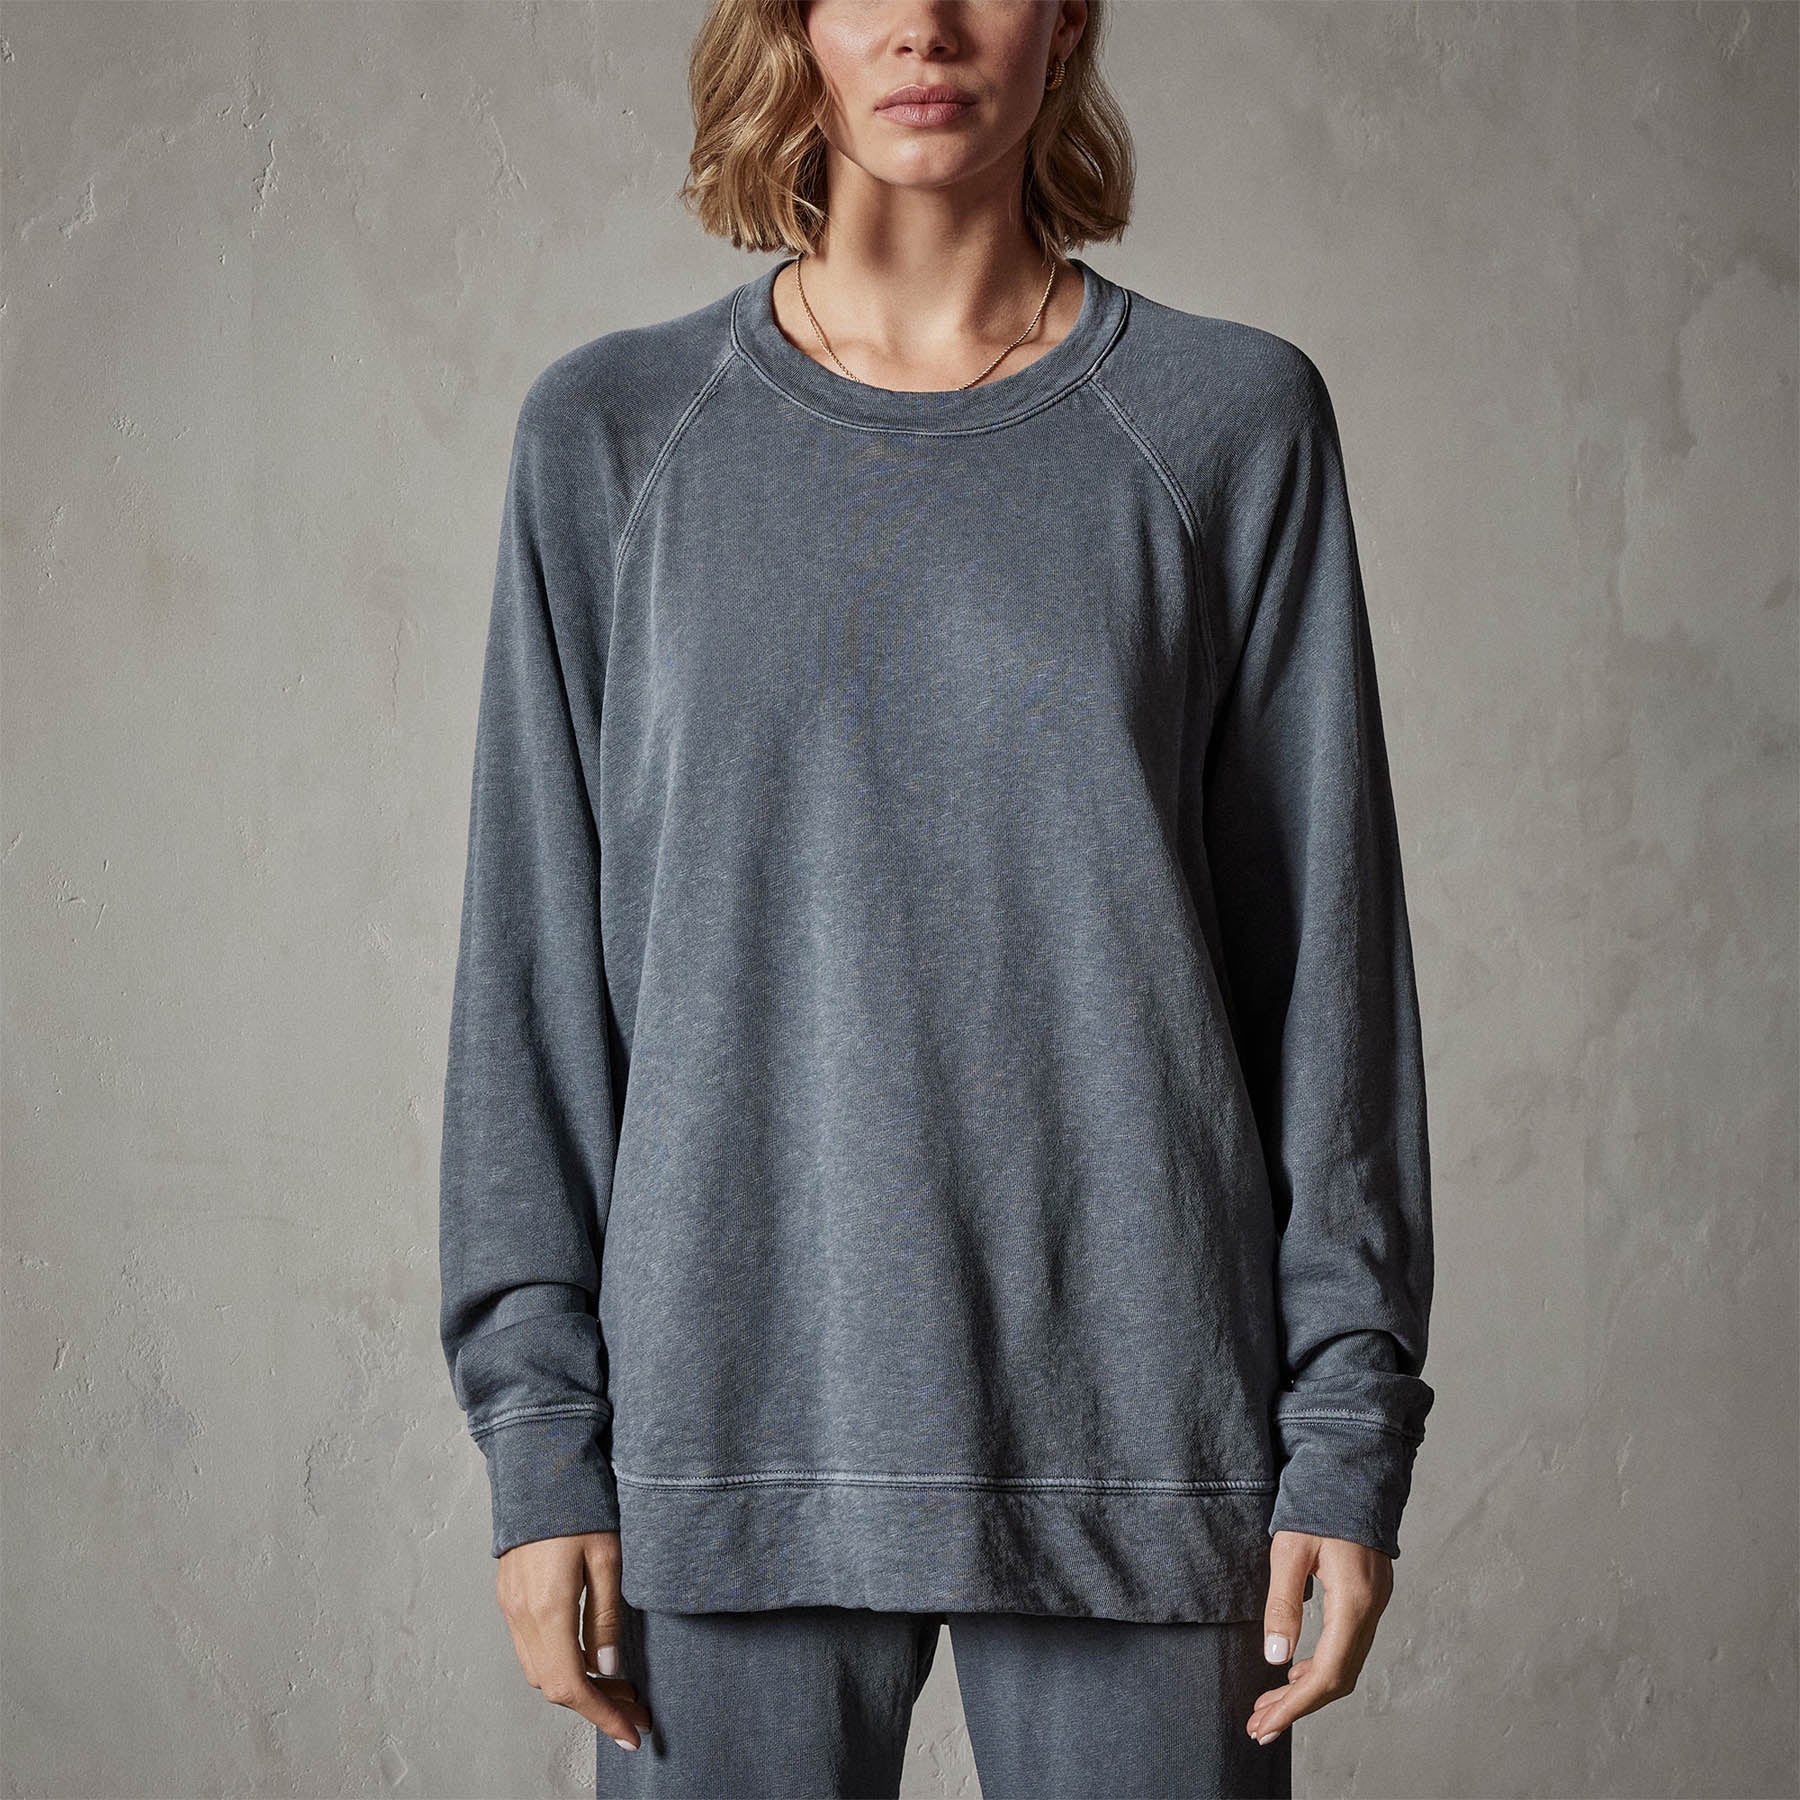 Vintage French Terry Relaxed Sweatshirt - Maine Pigment | James ...